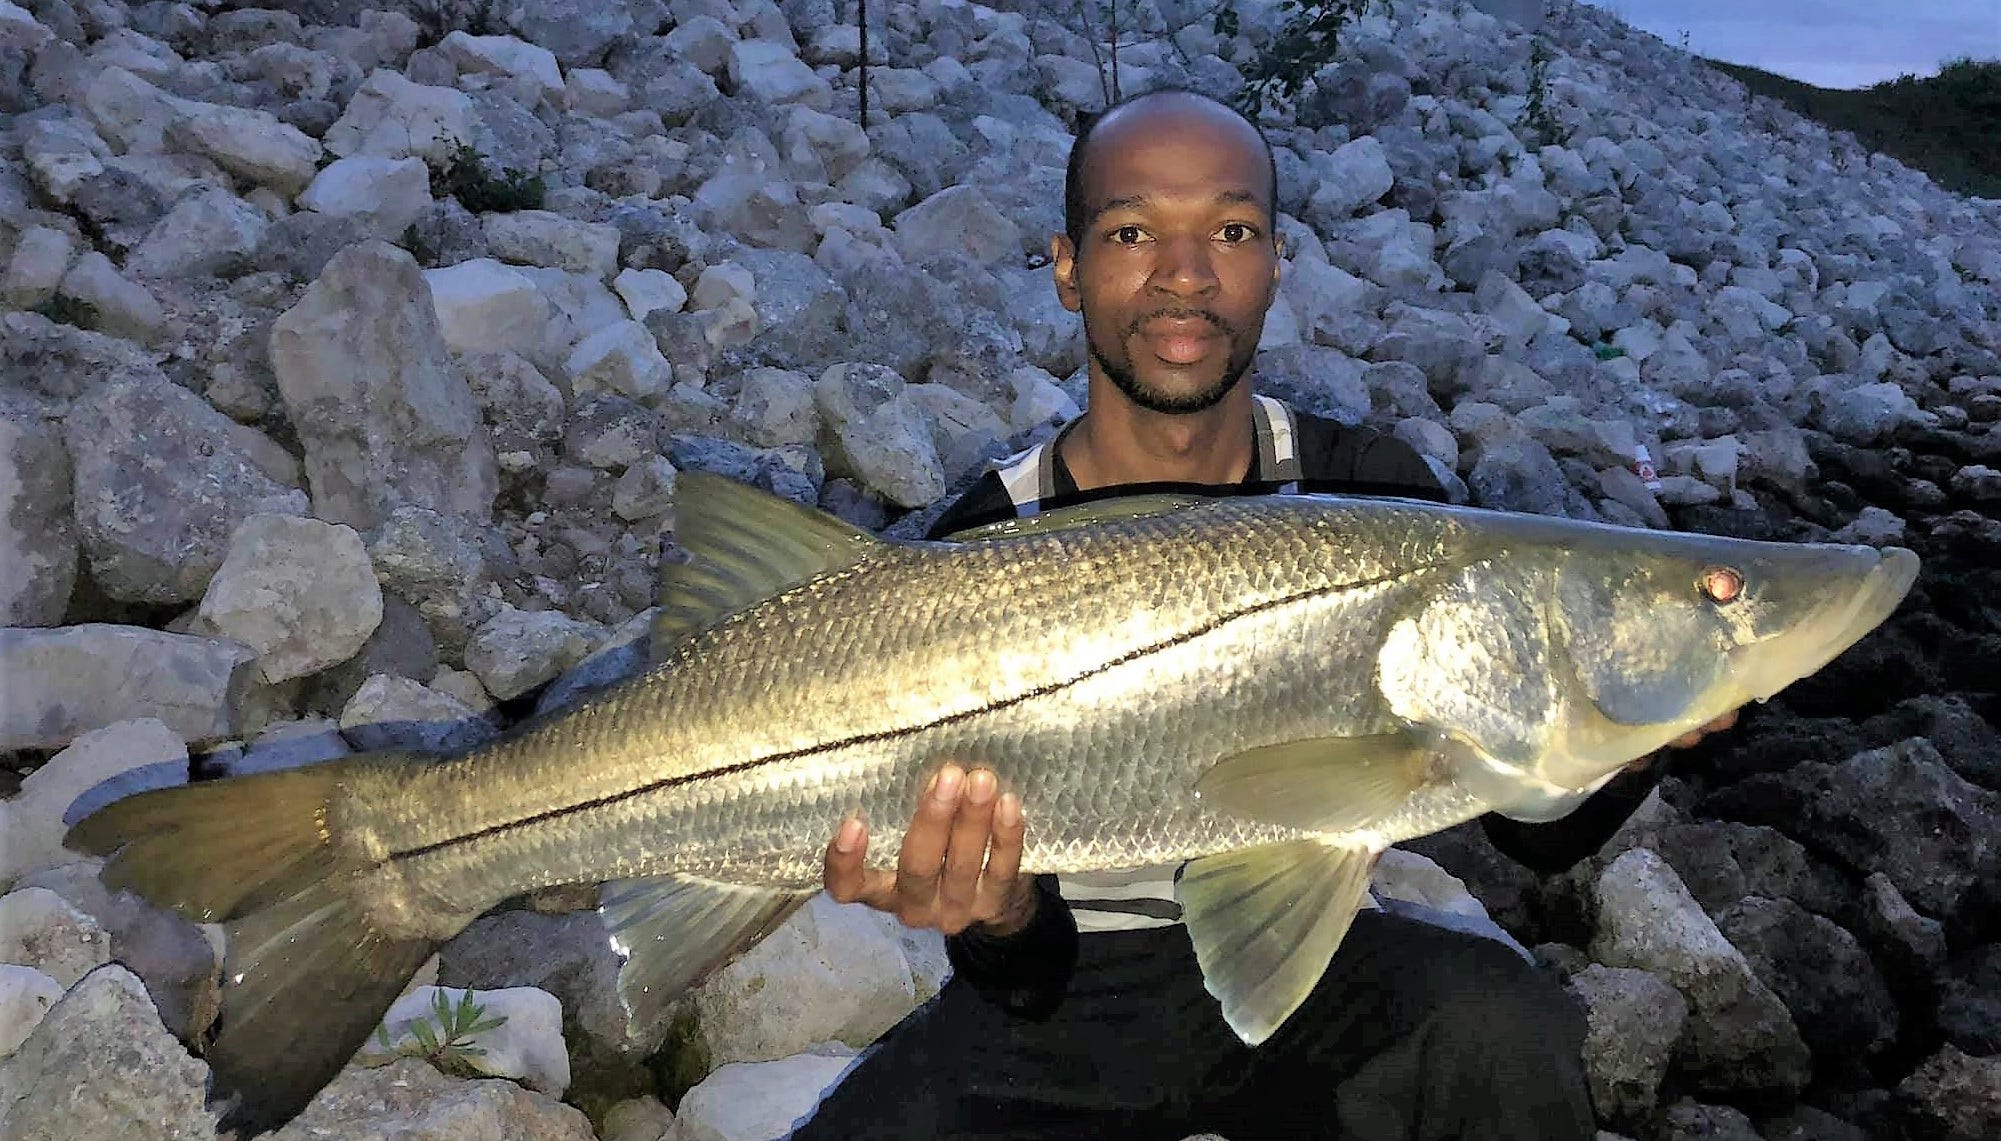 Florida snook season opens Feb. 1. Tips for catching this feisty fish